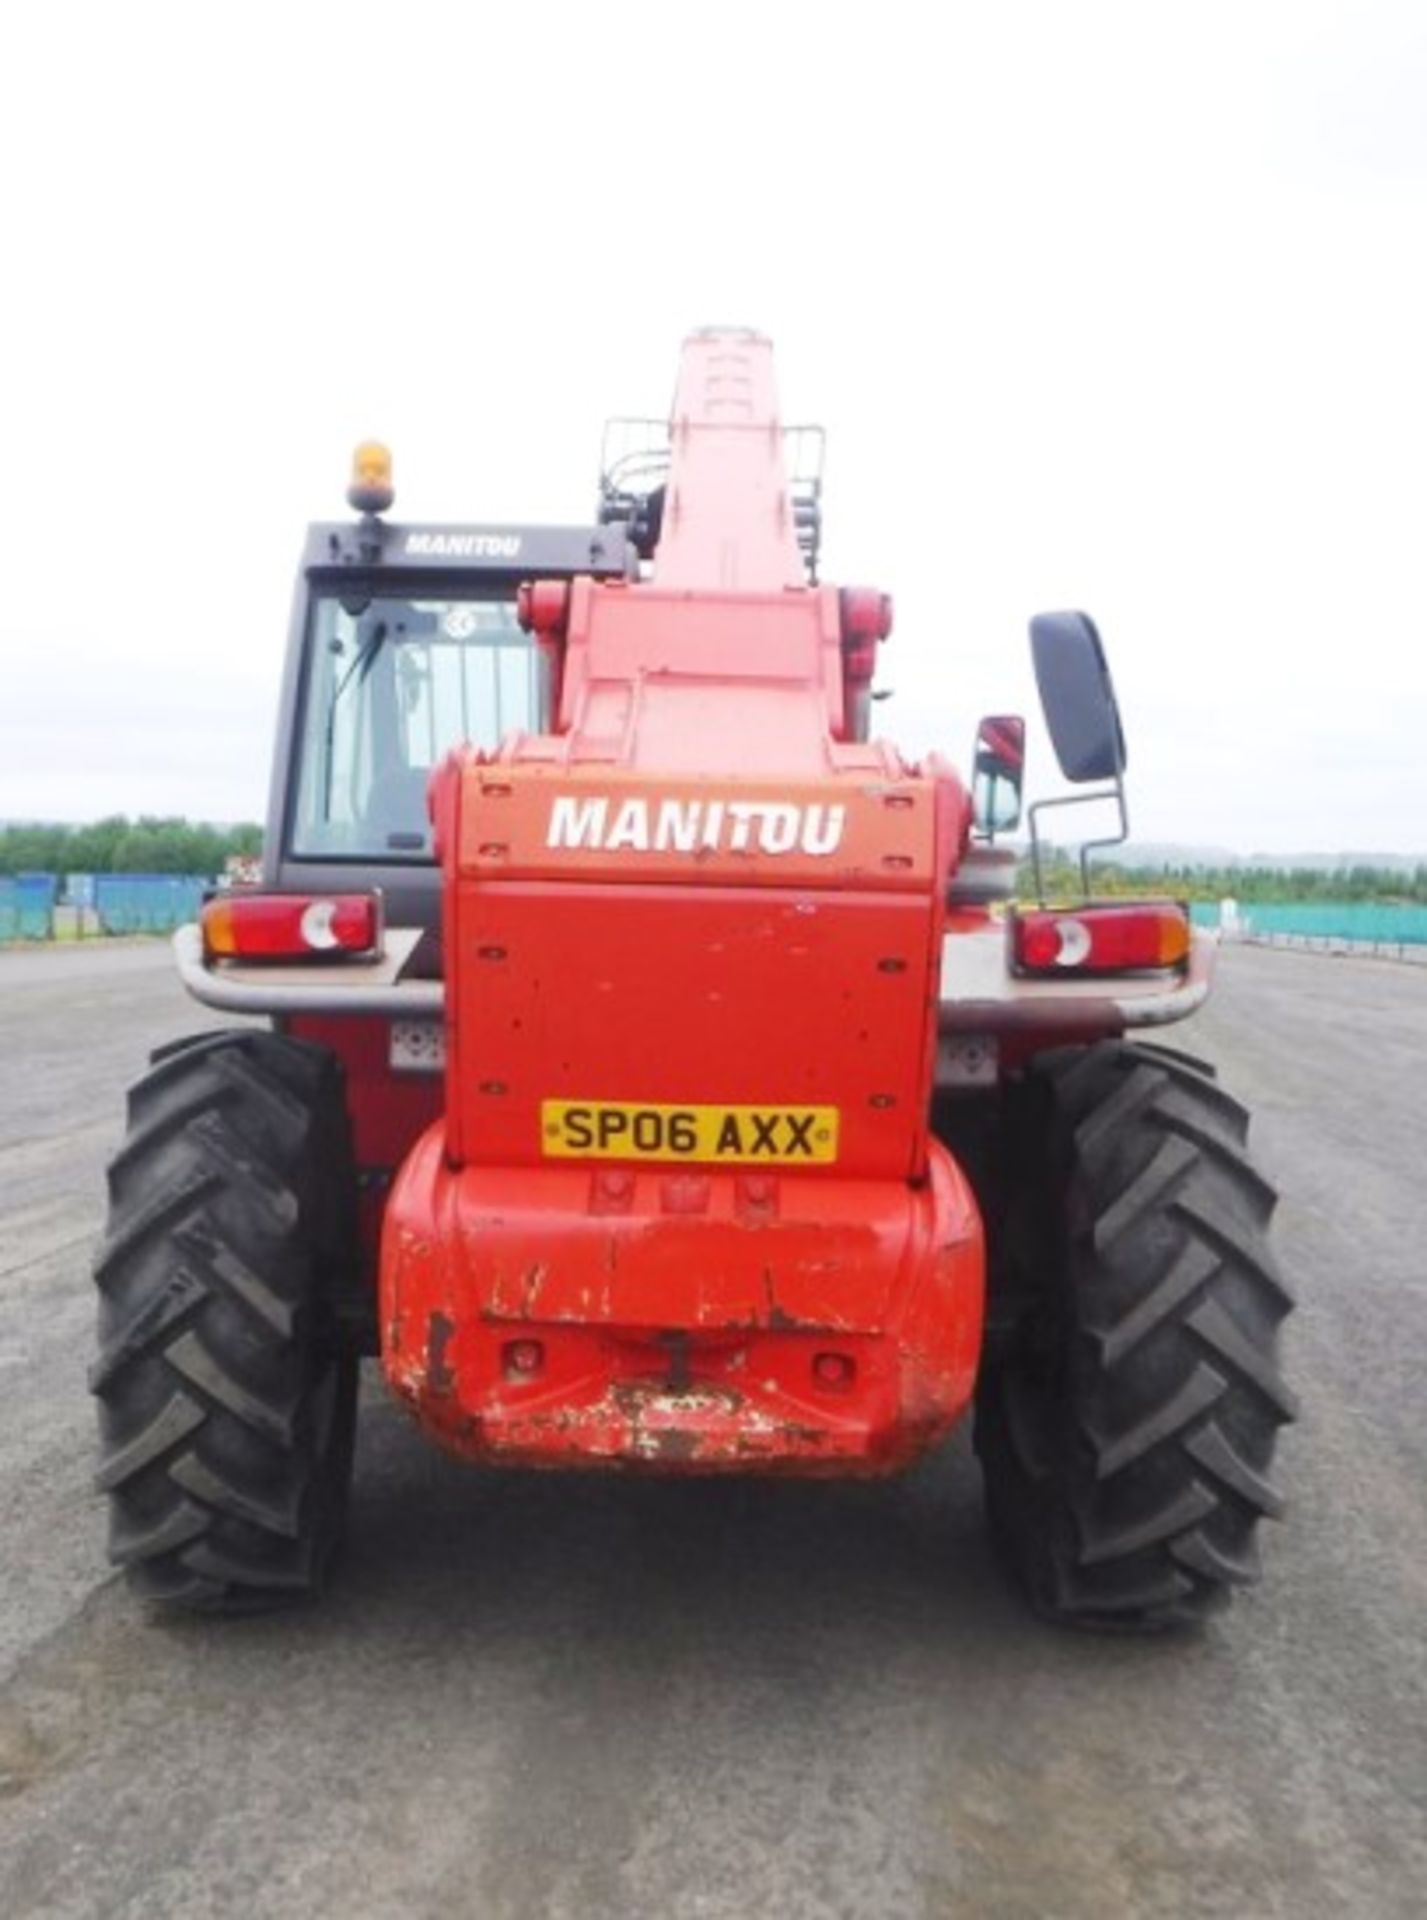 2006 MANITOU 14/35 TELEHANDLER c/w bucket & forks s/n 1230044 Reg no SP06 AXX 2646hrs (not verified) - Image 19 of 31